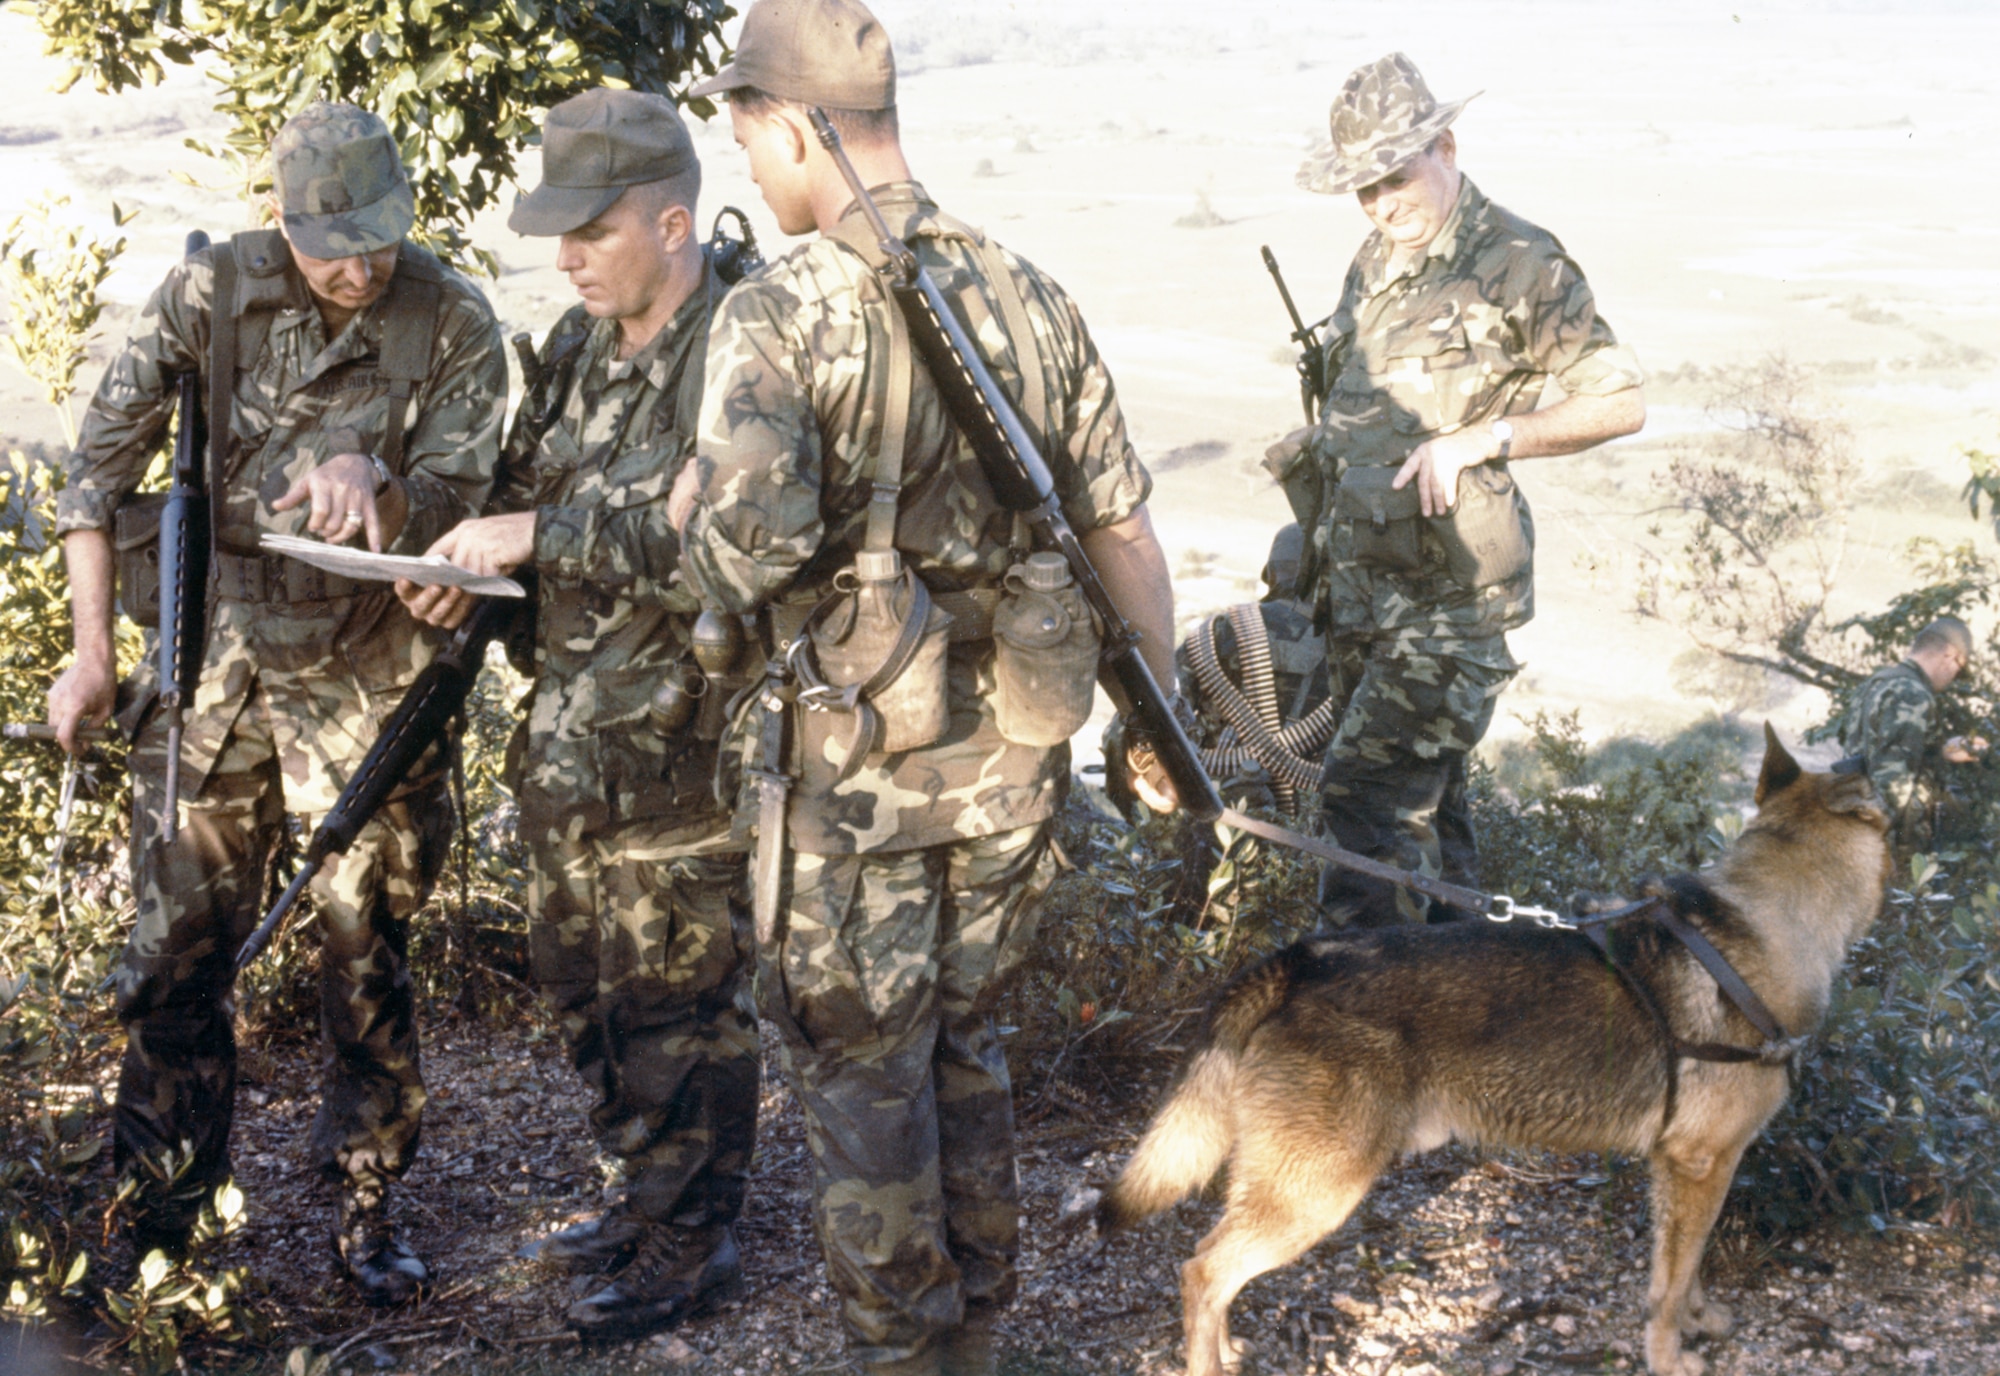 Security Police team with a dog on an early morning reconnaissance patrol near Phu Cat Air Base, South Vietnam, in 1967. (U.S. Air Force photo).